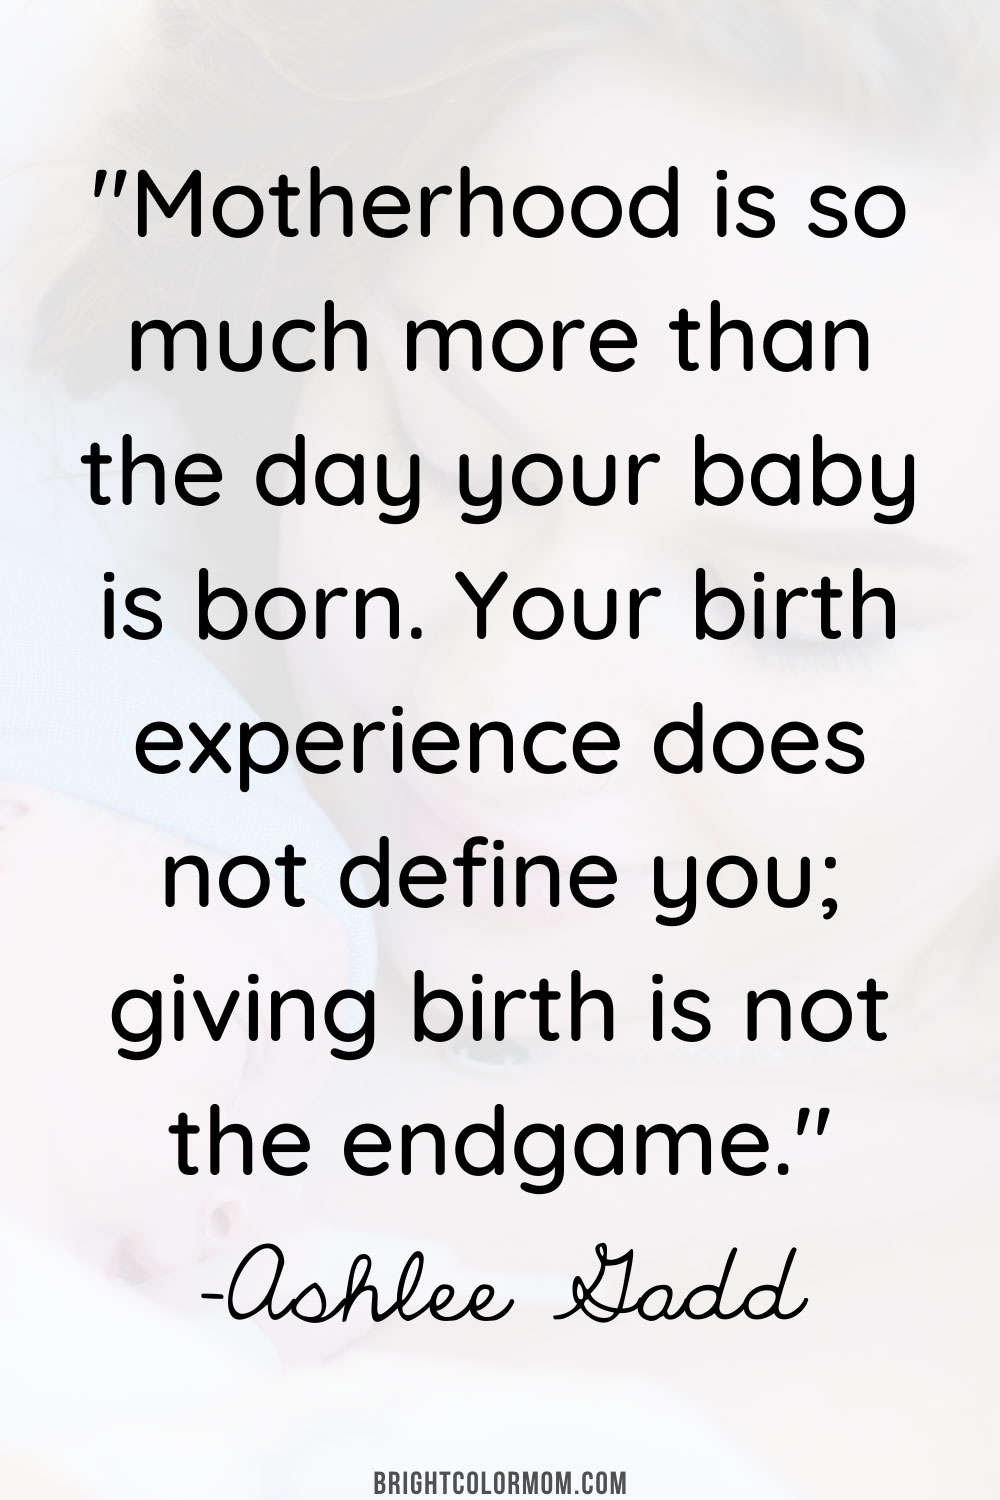 Motherhood is so much more than the day your baby is born. Your birth experience does not define you; giving birth is not the endgame.